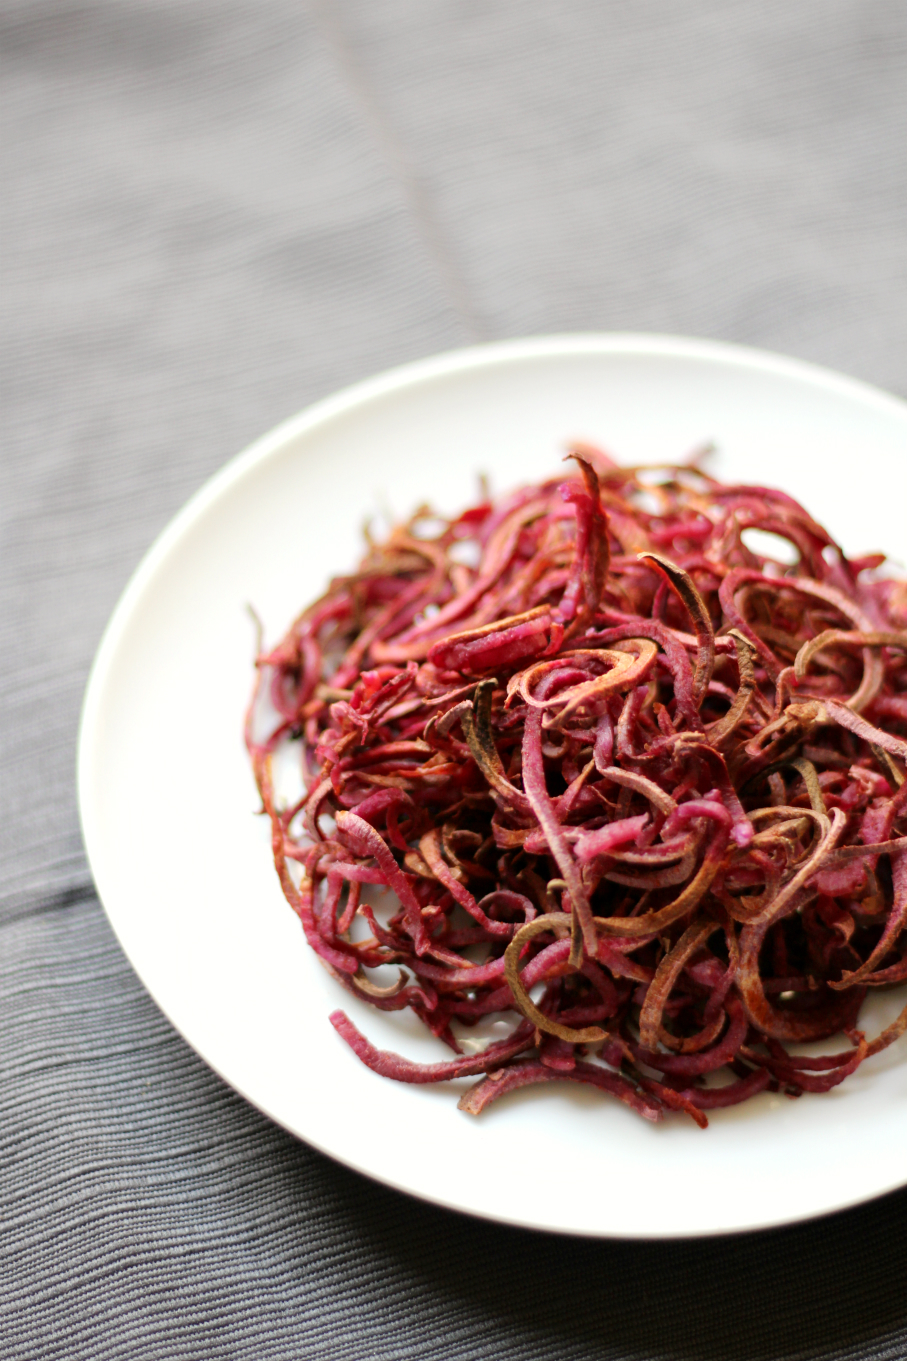 Smoky Spiralized Purple Sweet Potato Fries | Strength and Sunshine @RebeccaGF666 Take your fries up a few notches. These smoky spiralized purple sweet potato fries are anything but boring! Baked, crispy, colorful, & smoky! Gluten-free, vegan, paleo, & oil-free, these fries will change your life!